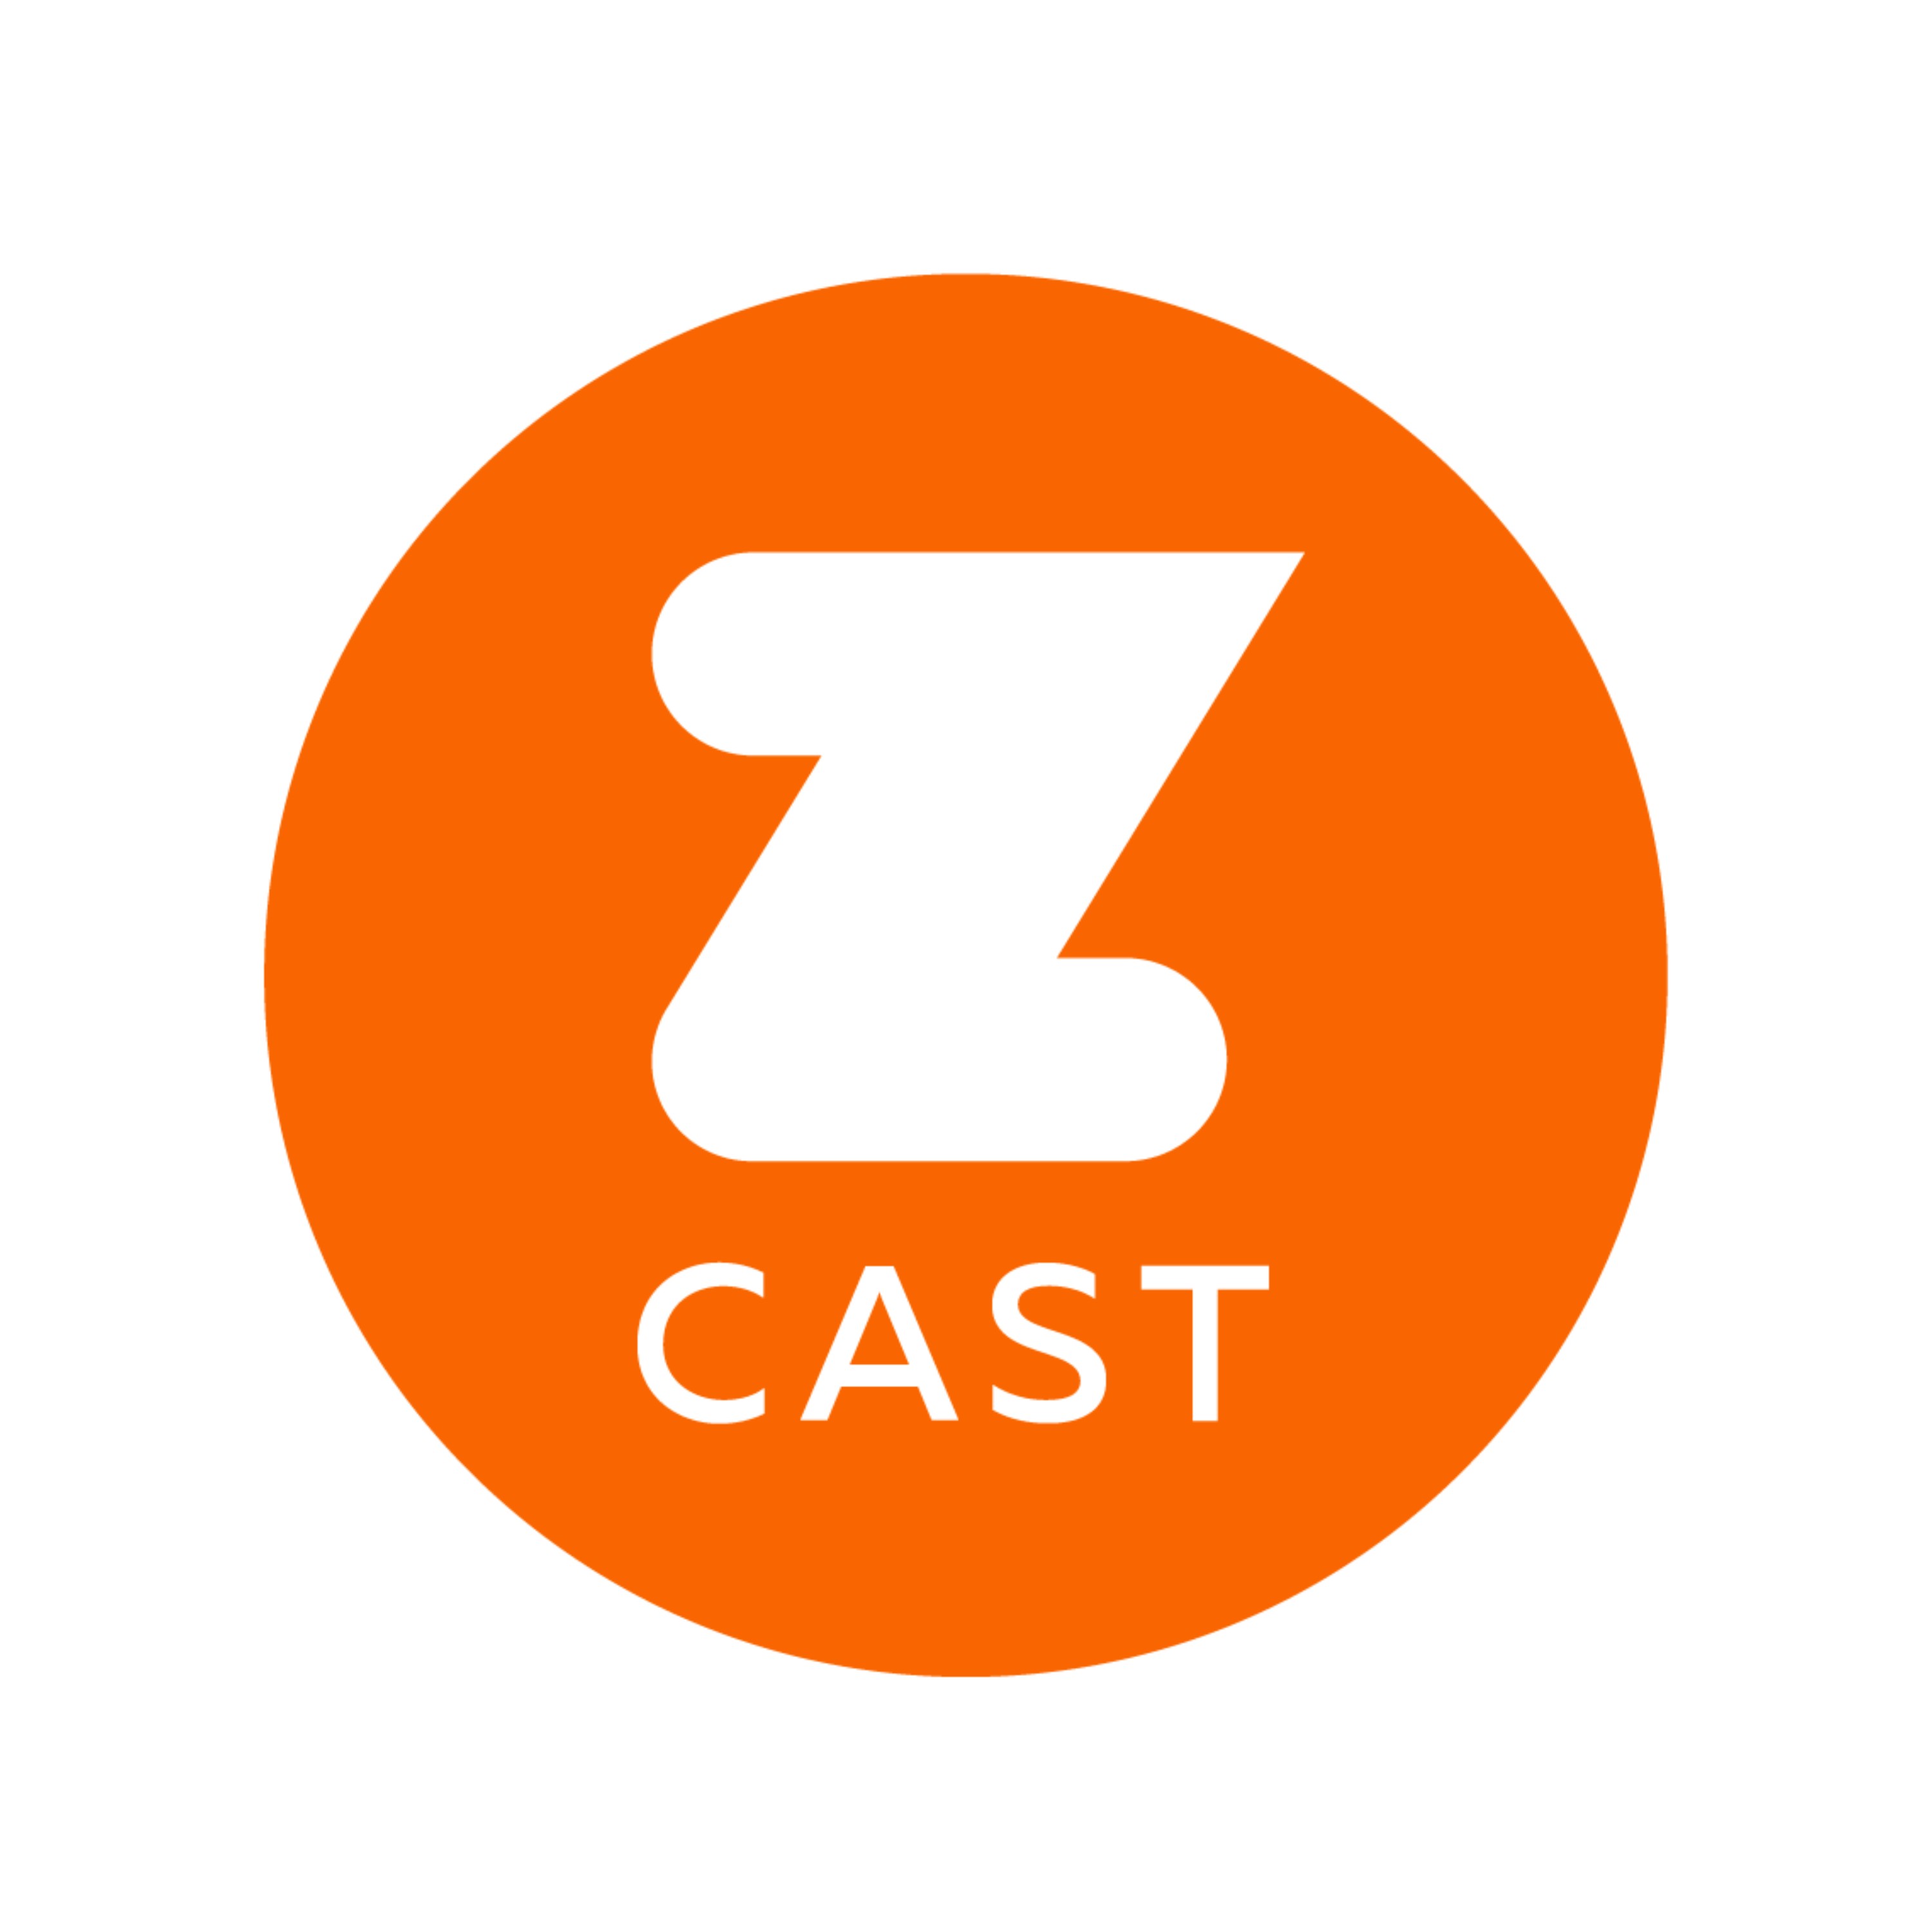 The Zwiftcast